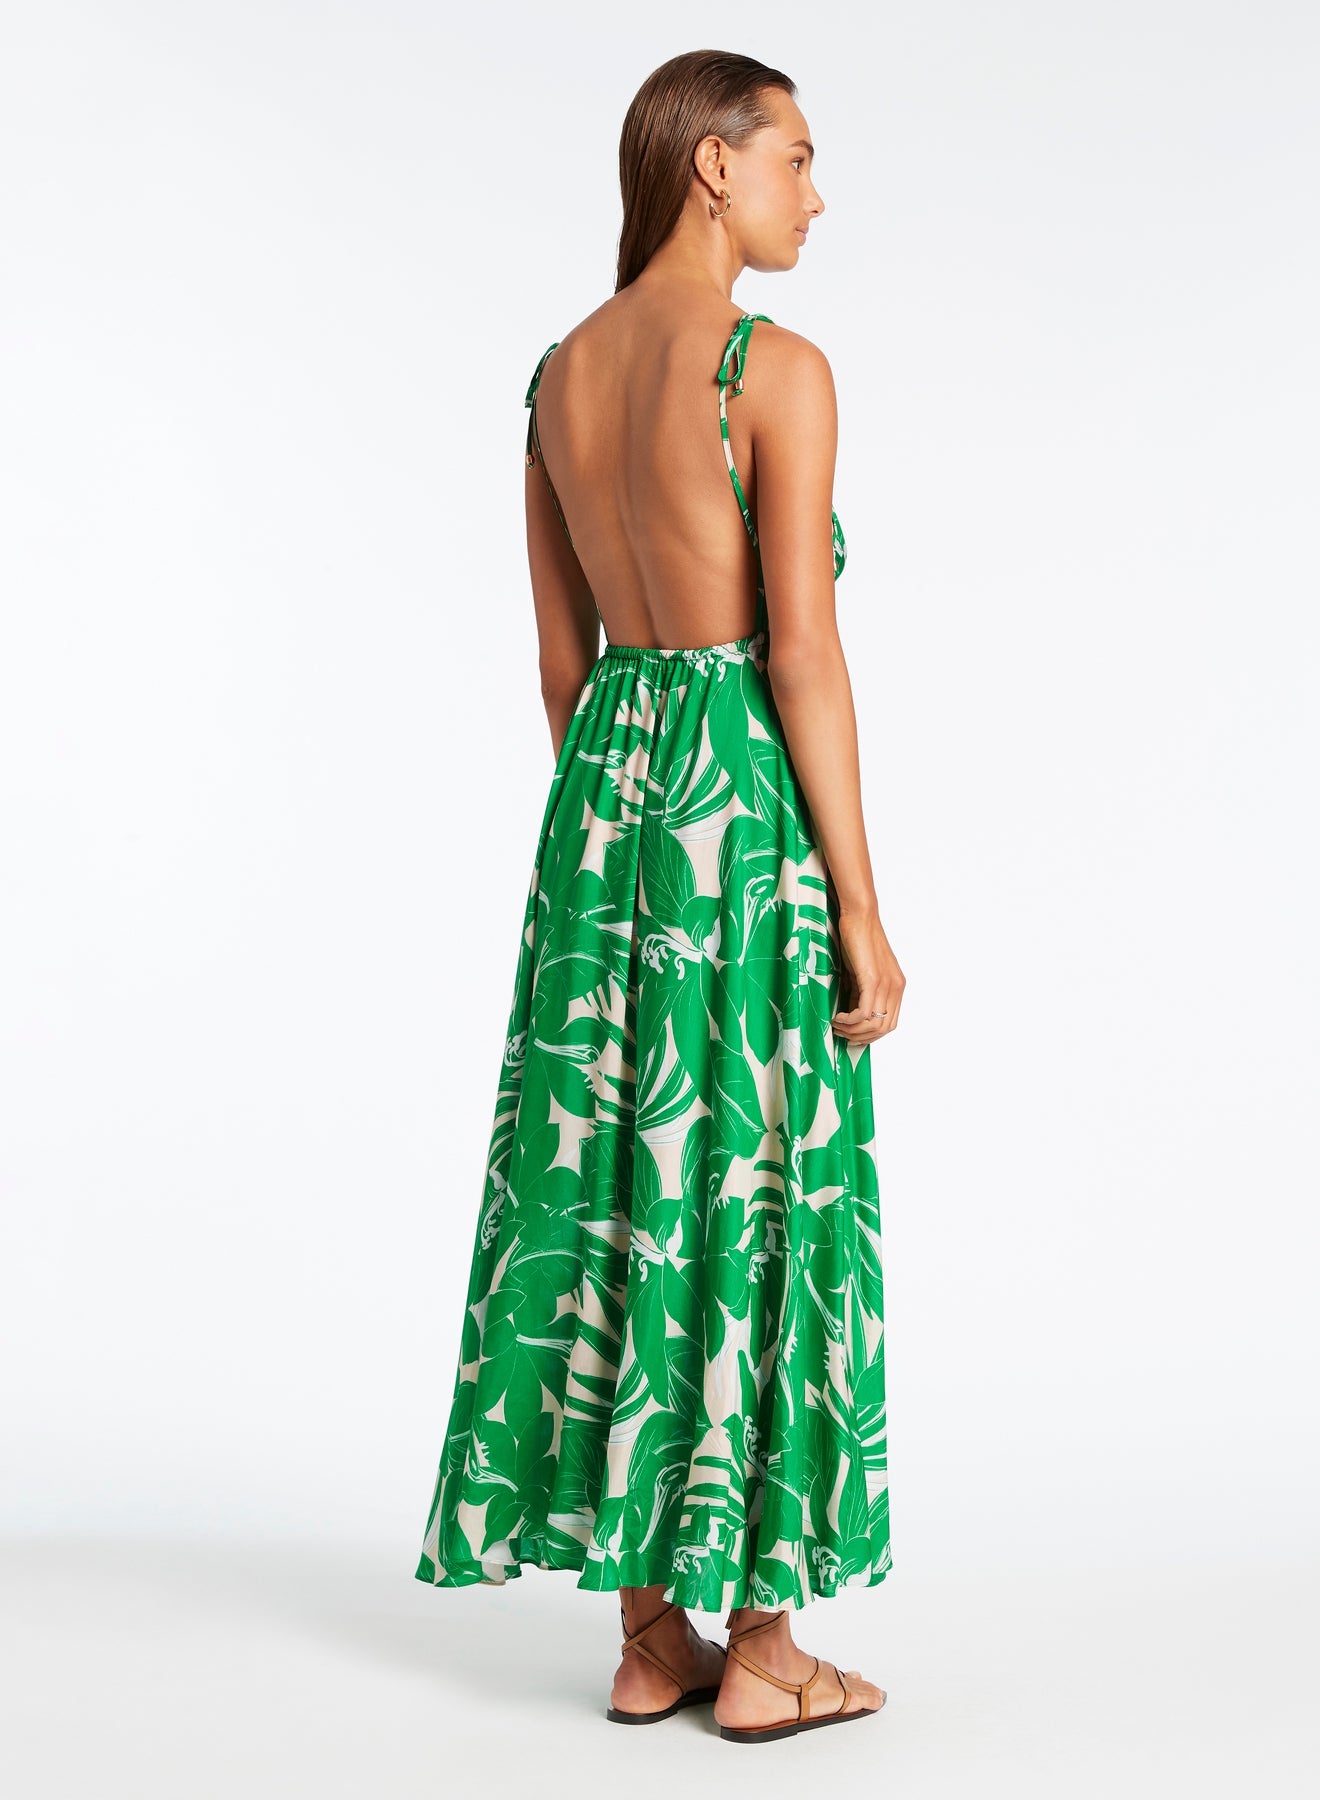 Jets Floreale Backless Maxi Dress In Green FINAL SALE